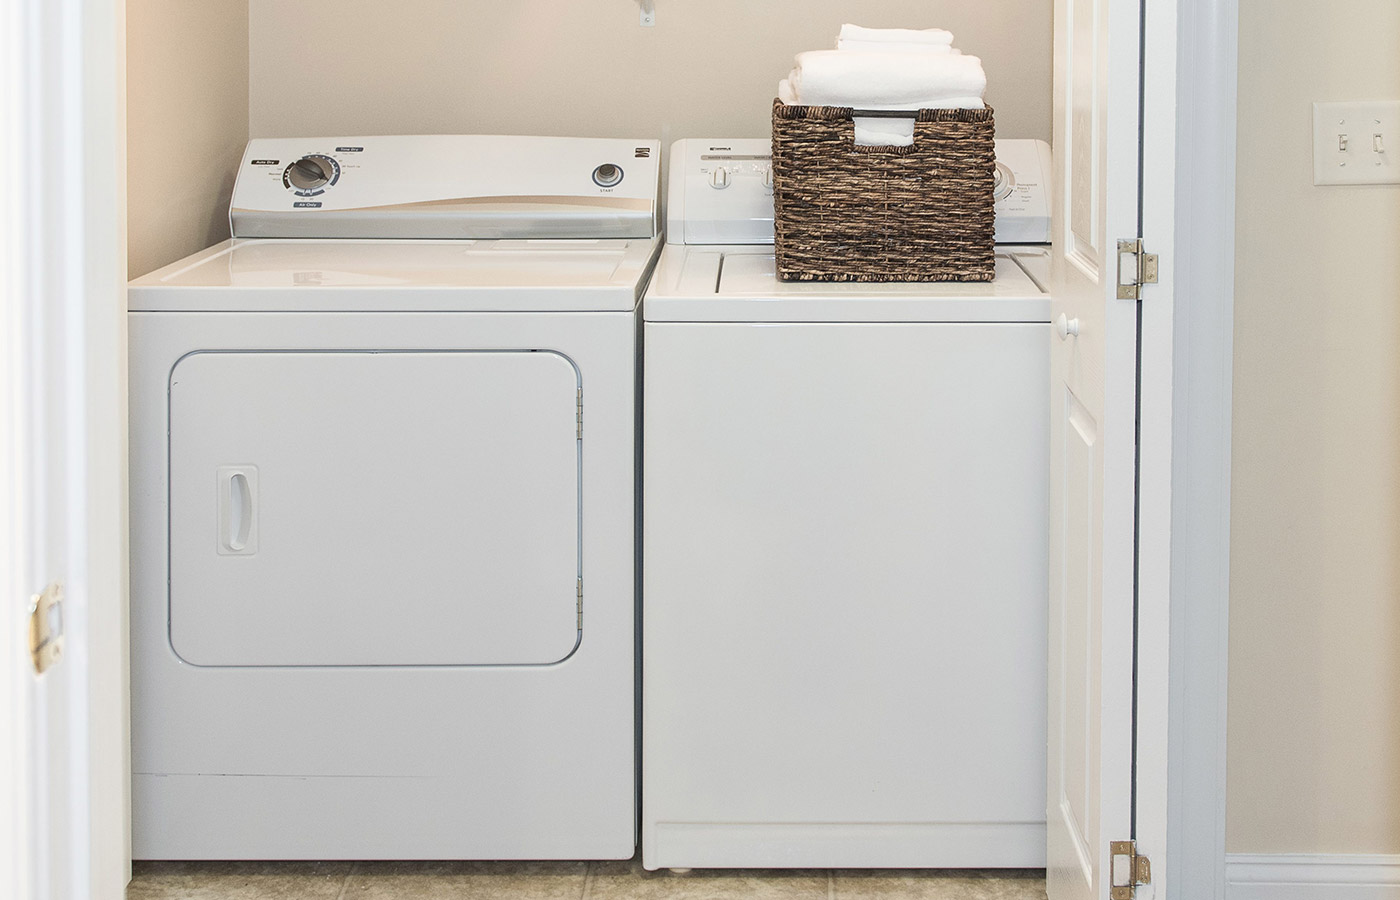 Washer and dryer units.